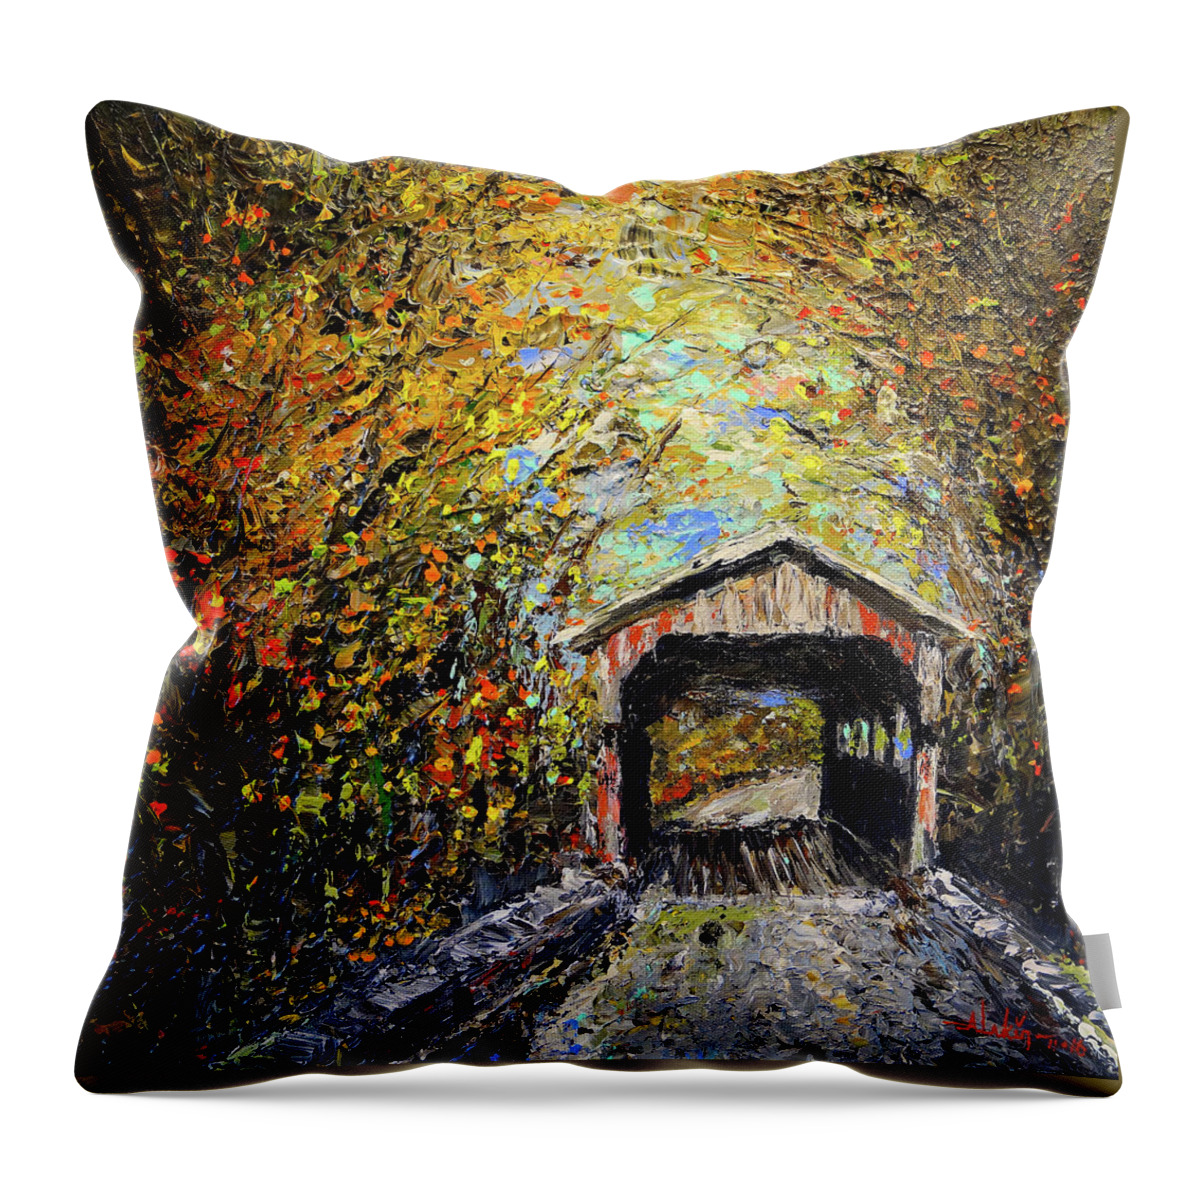 Vermont Throw Pillow featuring the painting Vermont by Alan Lakin